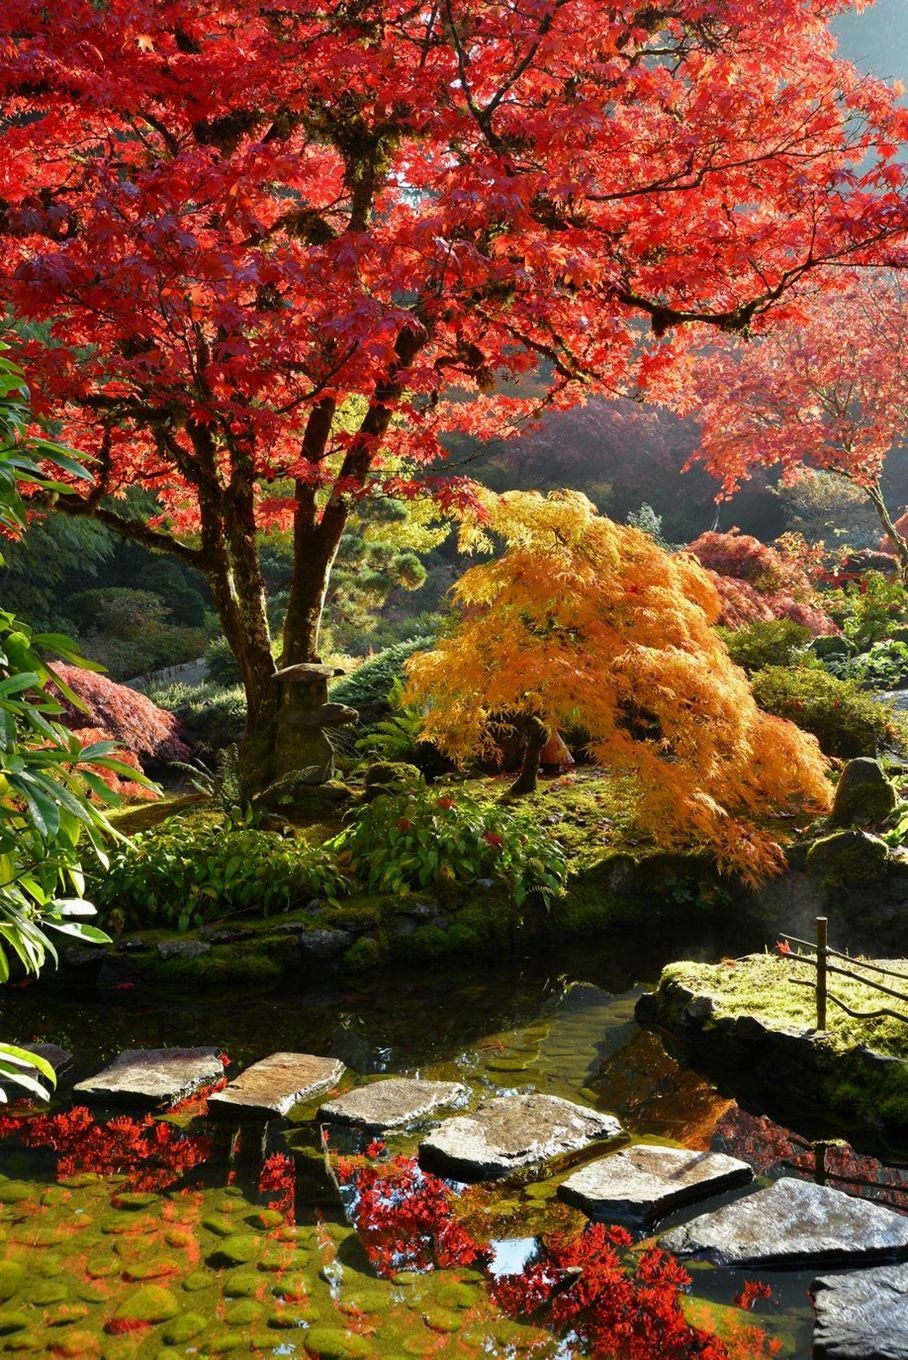 CONTEMPORARY JAPANESE GARDENS AND
LANDSCAPES